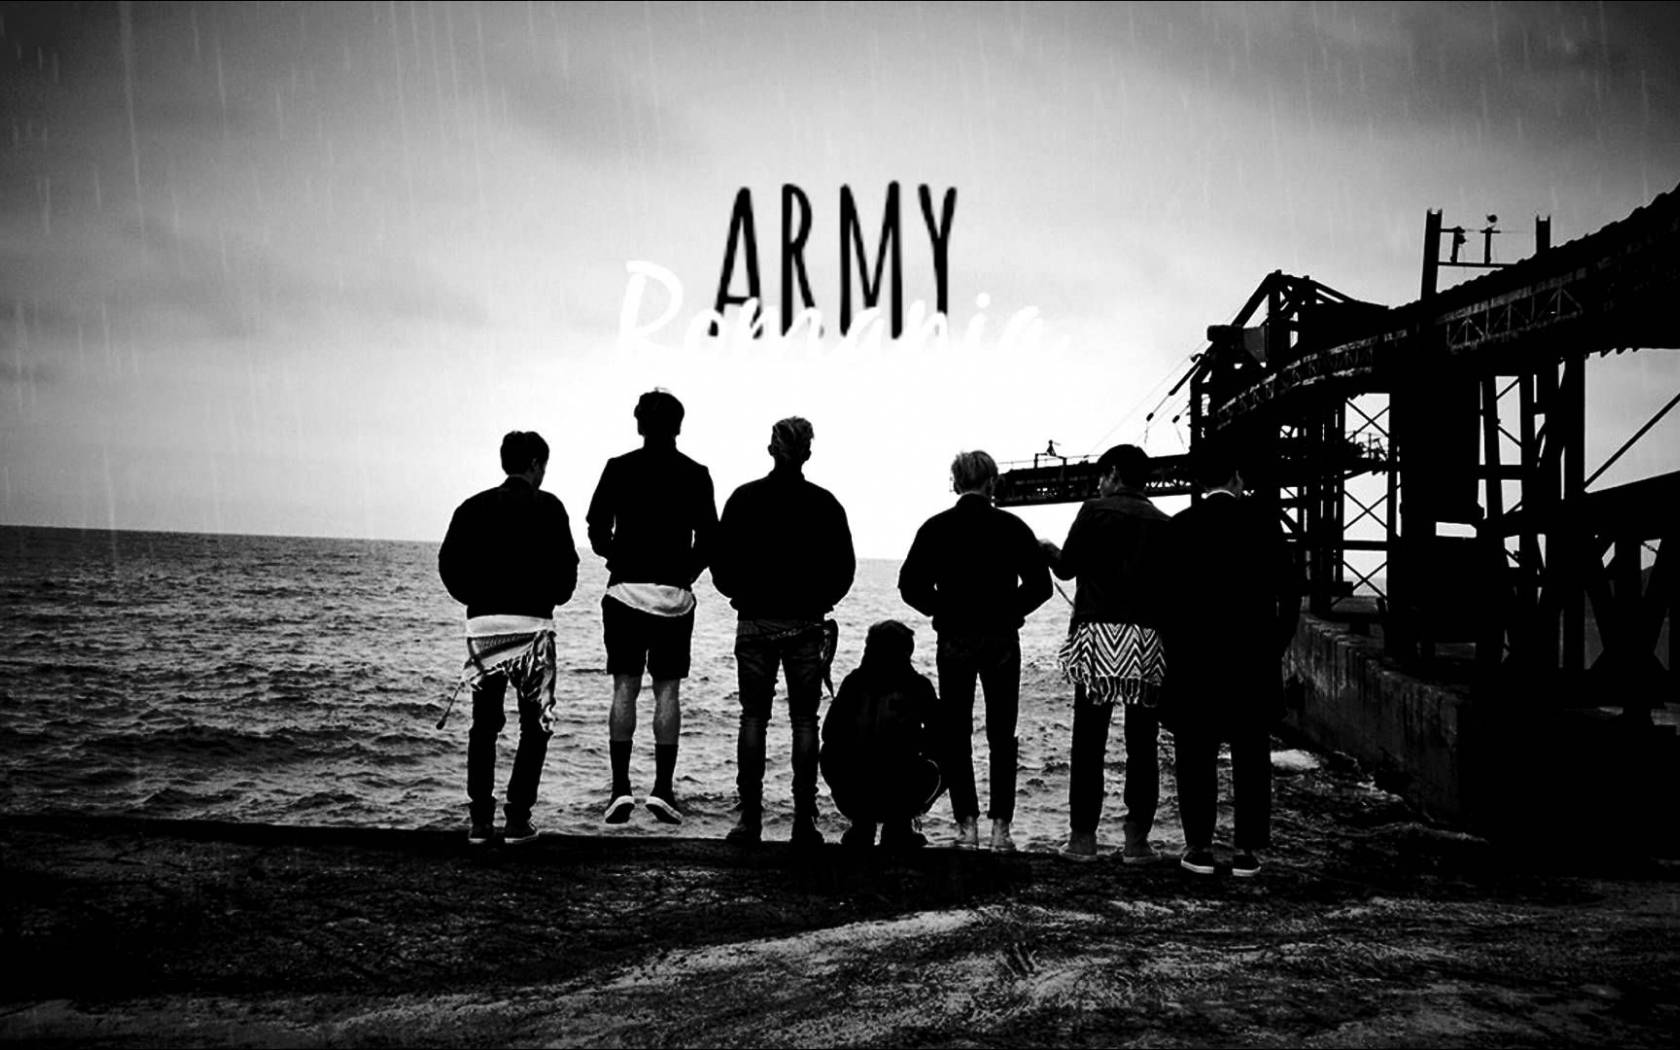 Bts Standing By The Sea Black And White Laptop Wallpaper